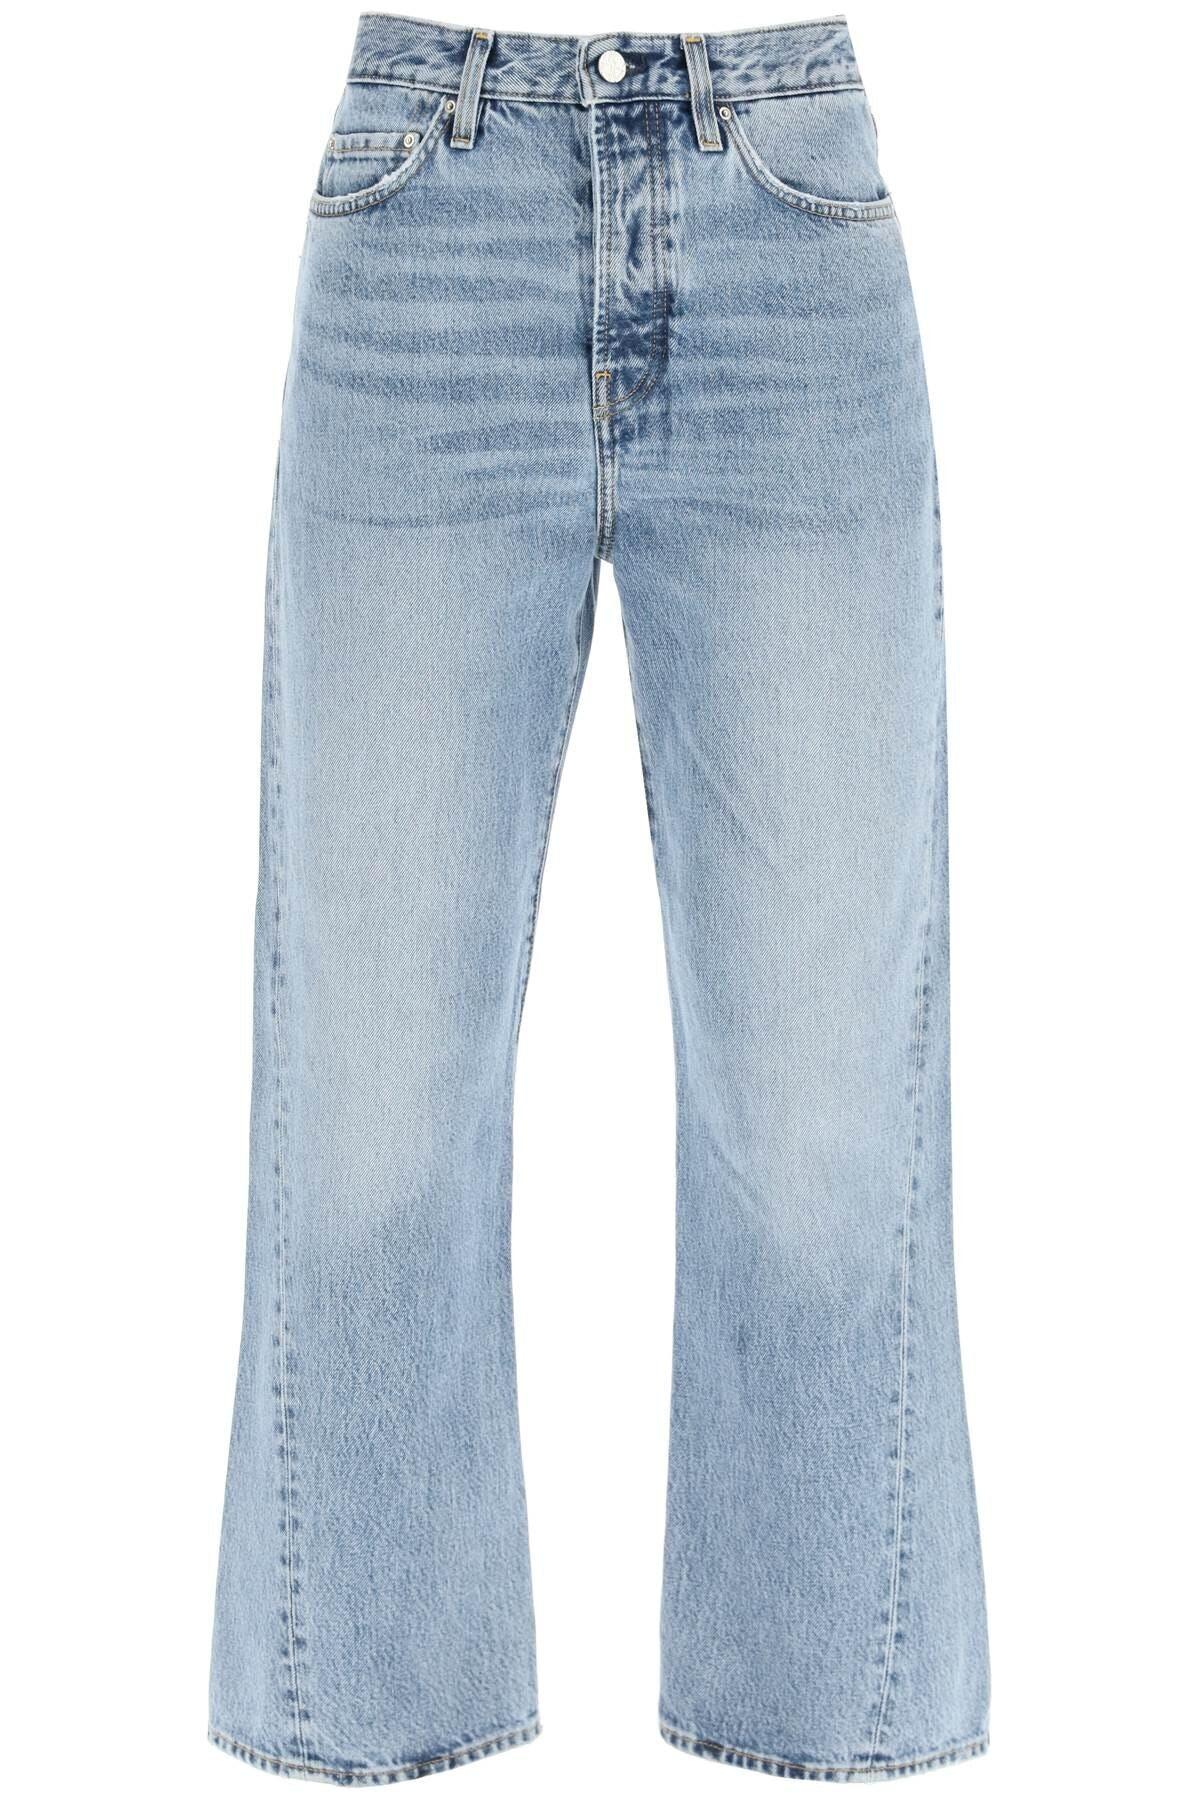 Totême Toteme Twisted Seam Straight Jeans in Blue | Lyst